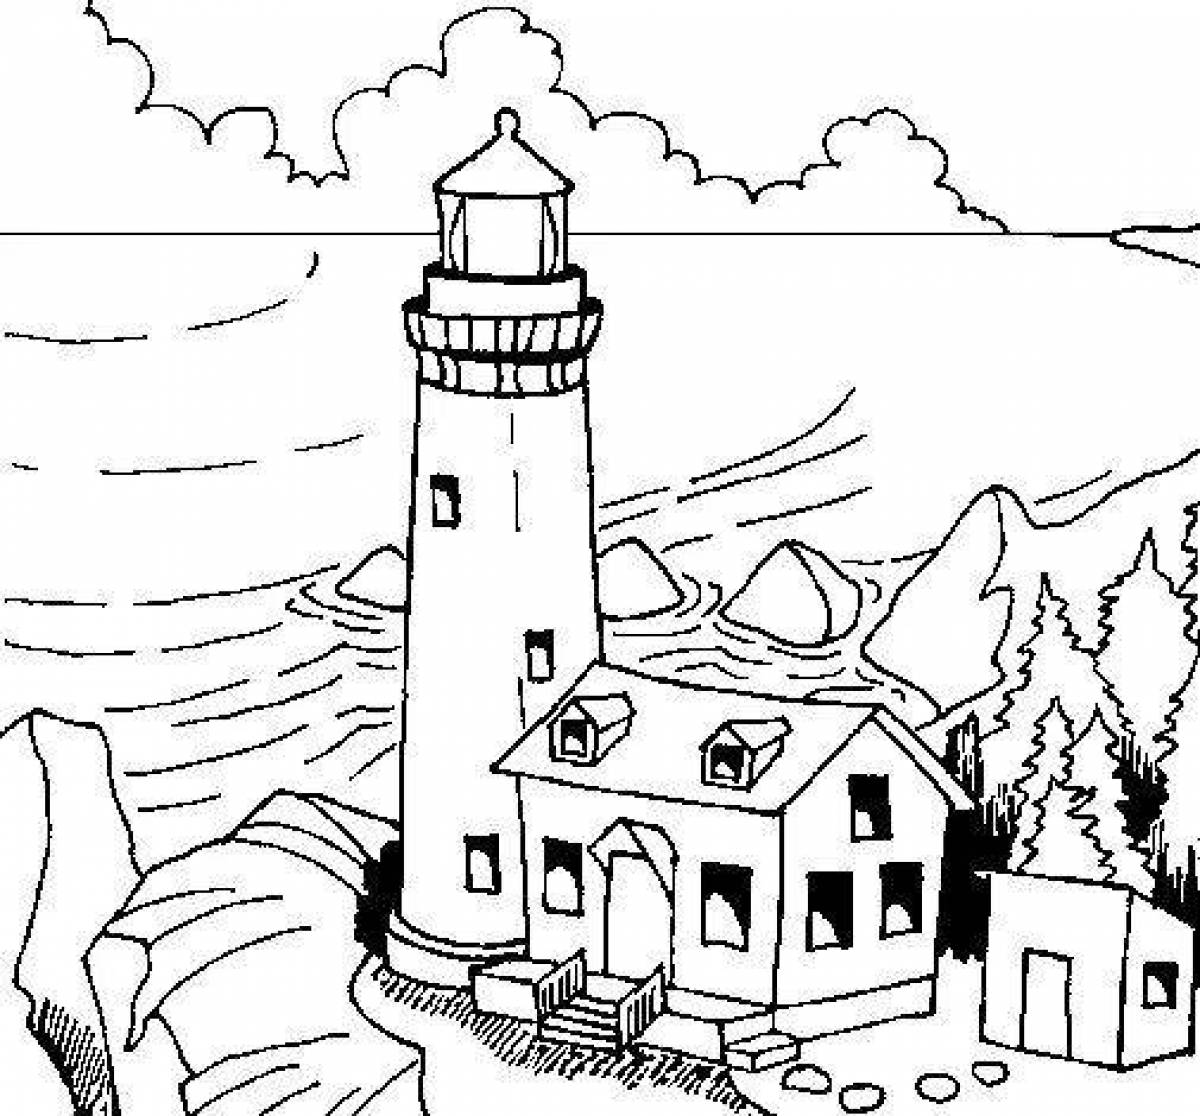 Incredible crimea coloring book for kids